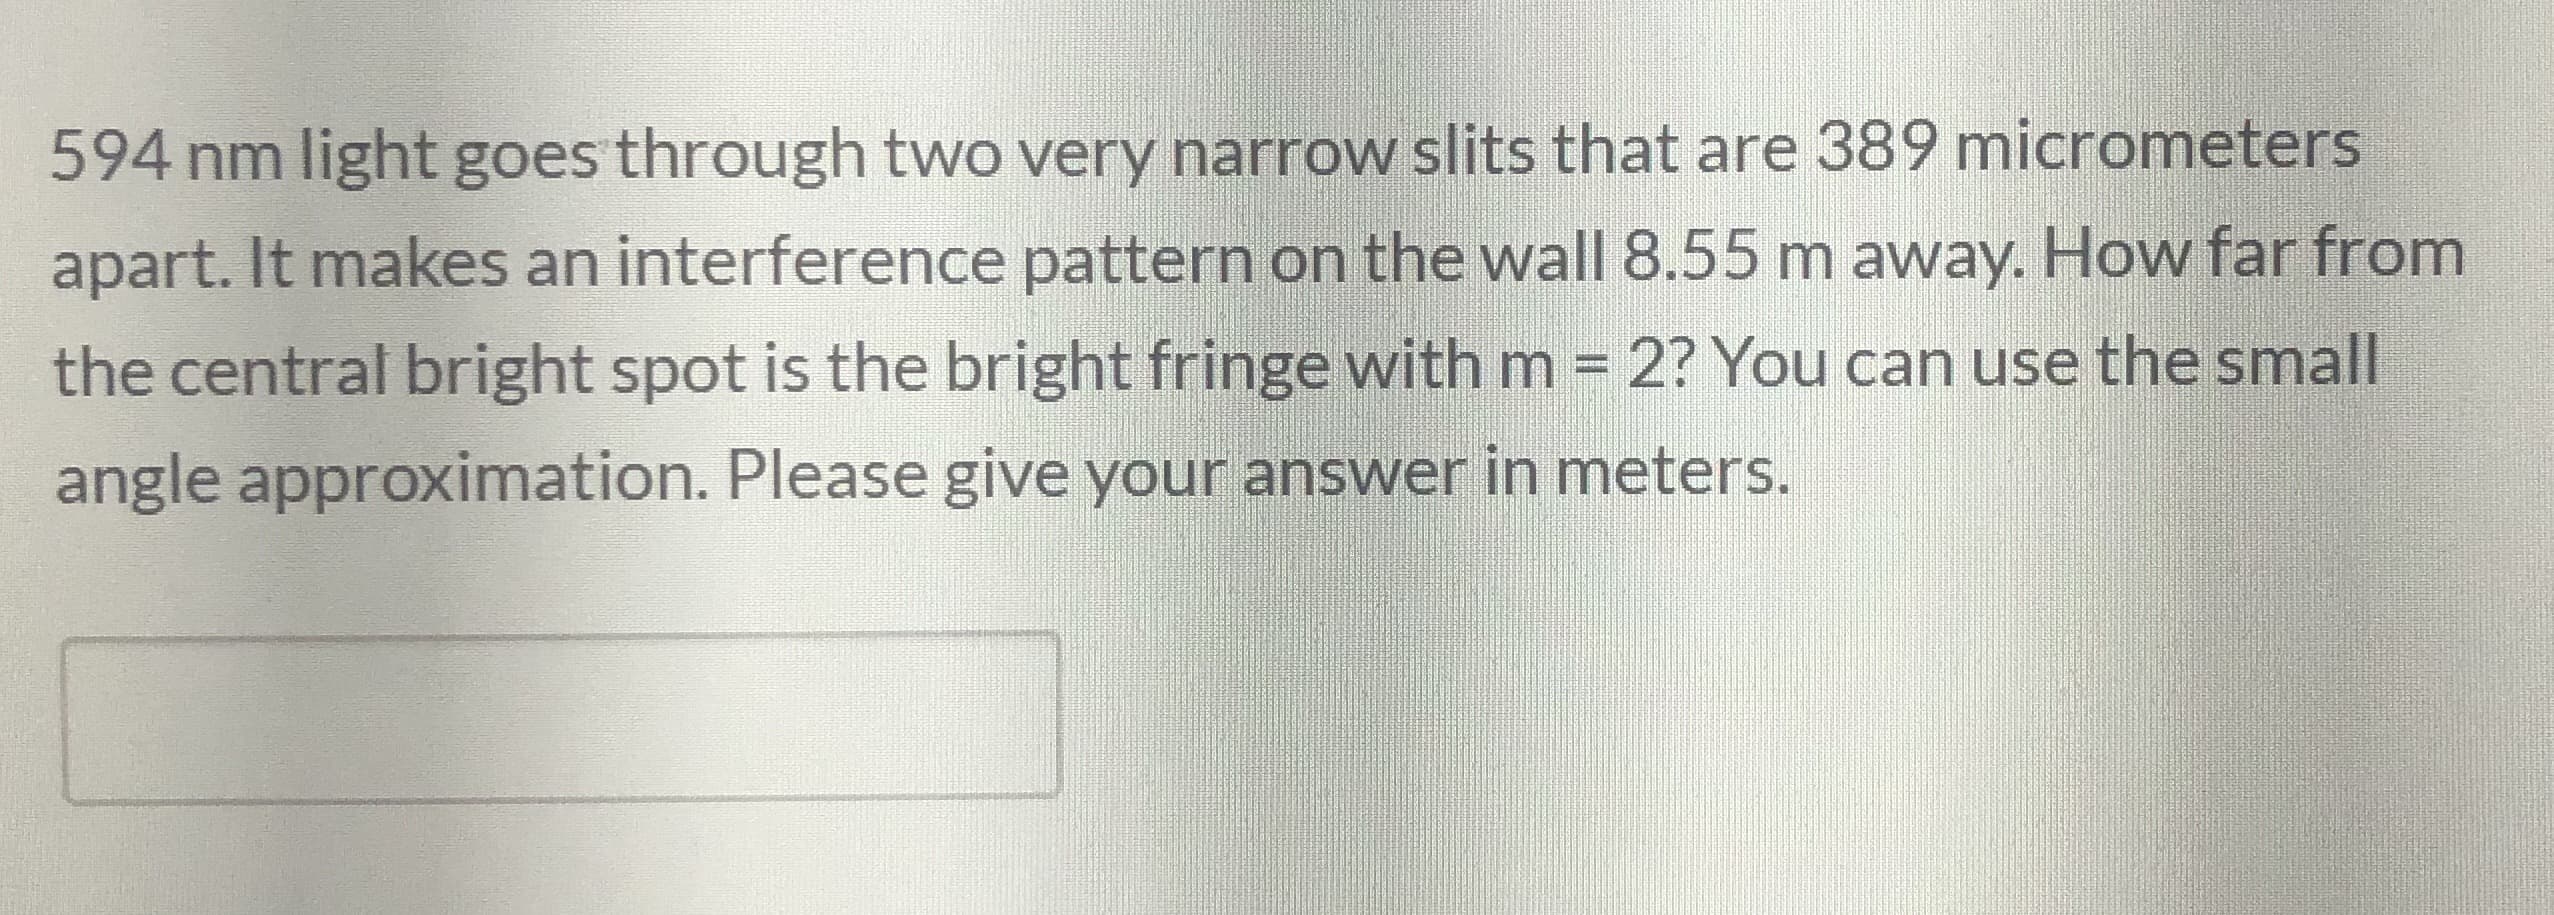 594 nm light goes through two very narrow slits that are 389 micrometers
apart. It makes an interference pattern on the wall 8.55 m away. How far from
the central bright spot is the bright fringe with m = 2? You can use the small
angle approximation. Please give your answer in meters.
